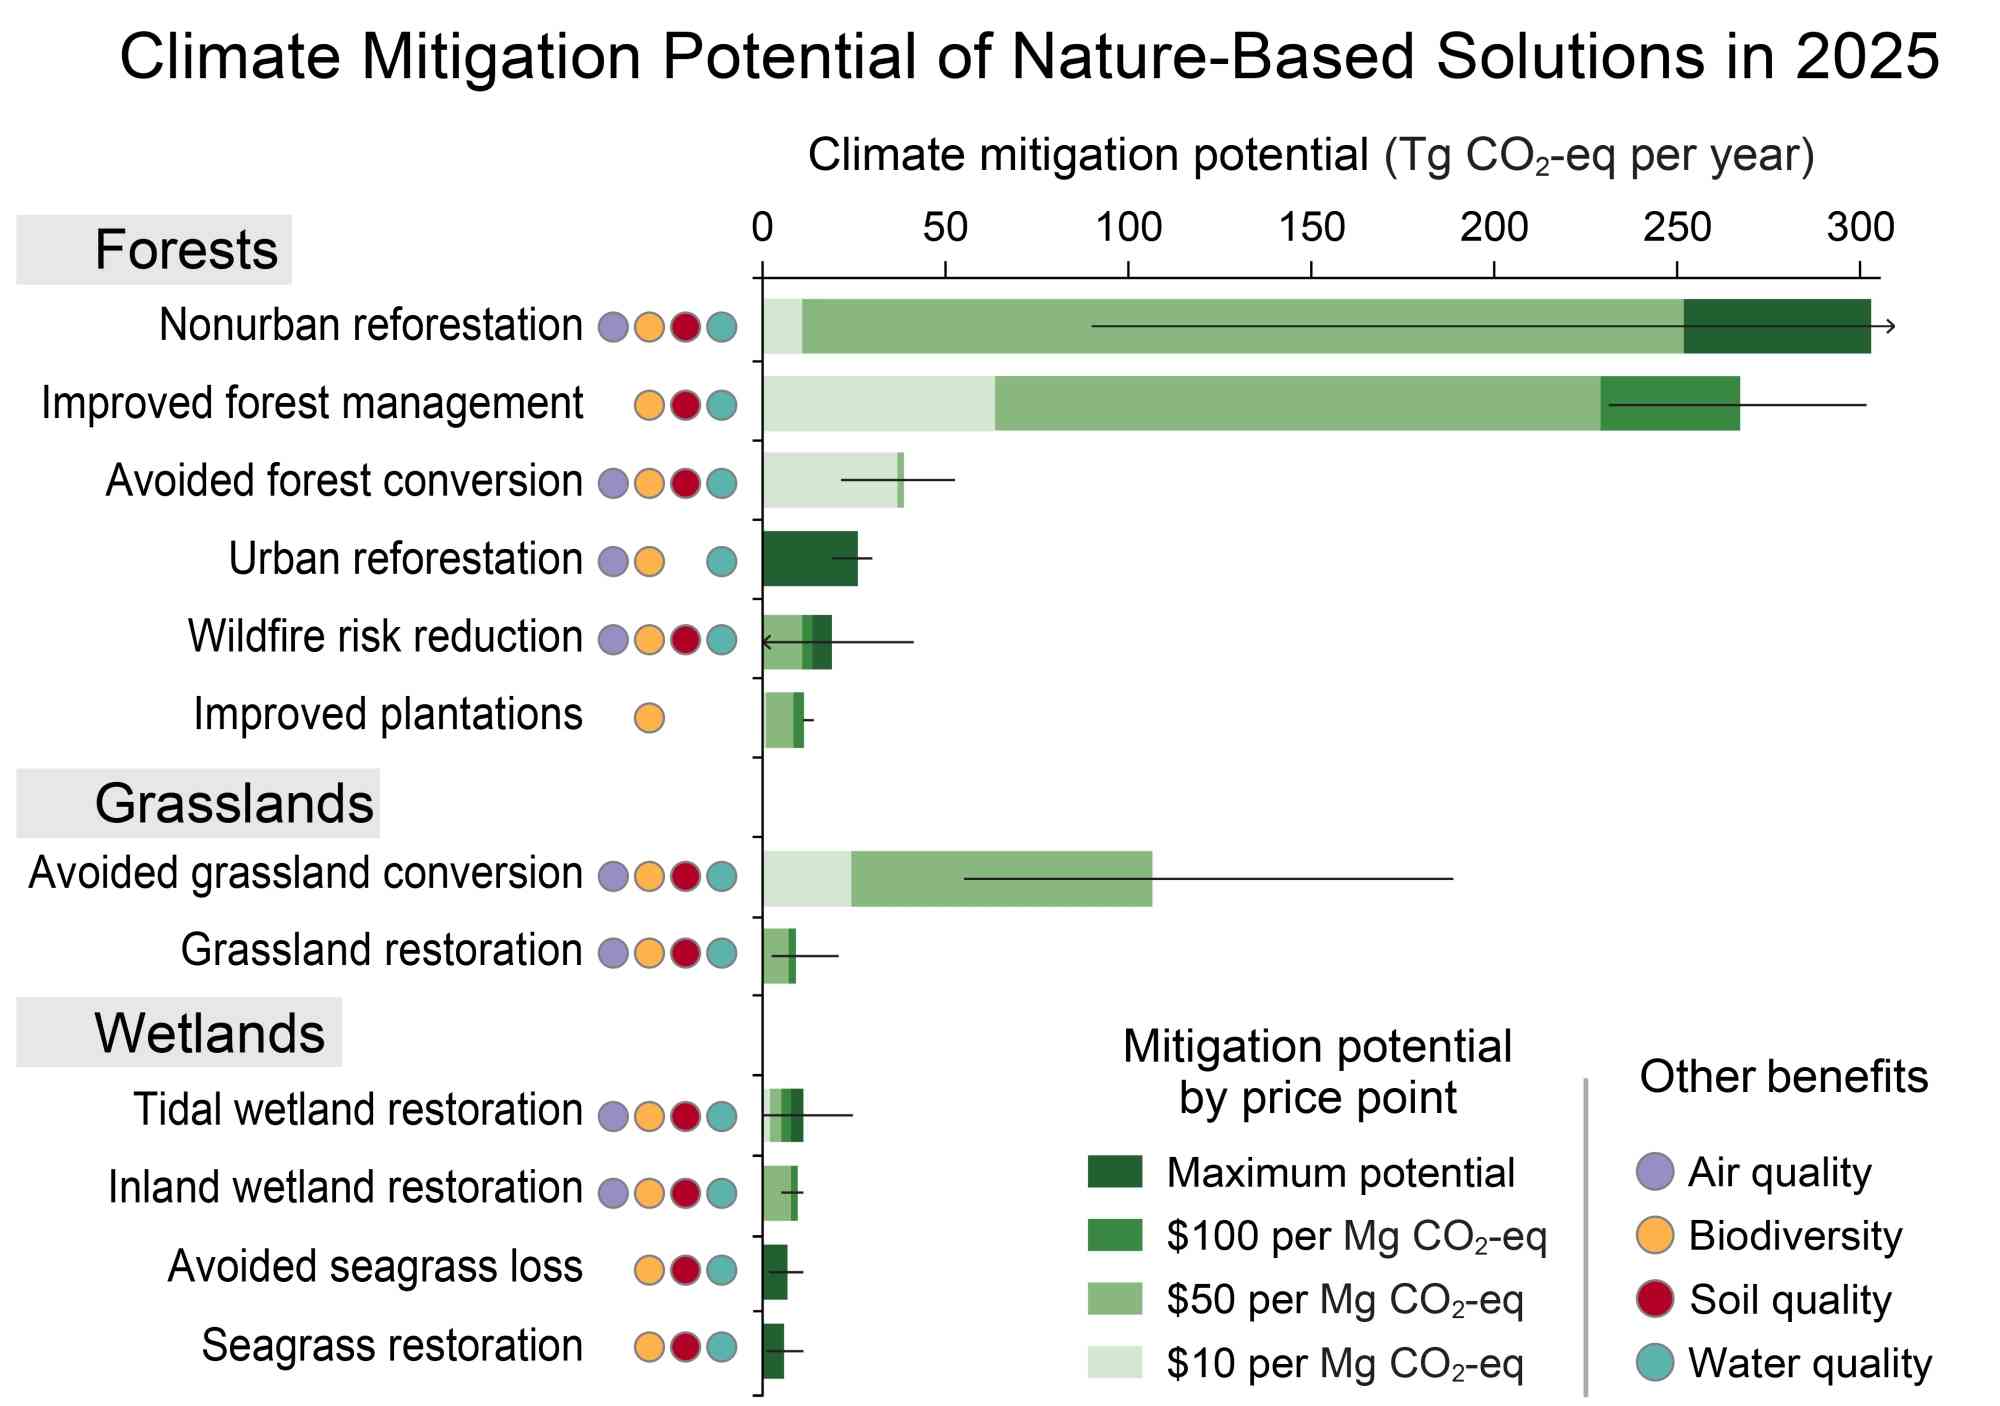 2024.01.11-Climate mitigation potential of nature-based solutions in 2025 graphic-Crimmins, A.R., C.W. Avery, D.R. Easterling, K.E. Kunkel, B.C. Stewart, and T.K. Maycock, Eds. U.S. Global Change Research Program